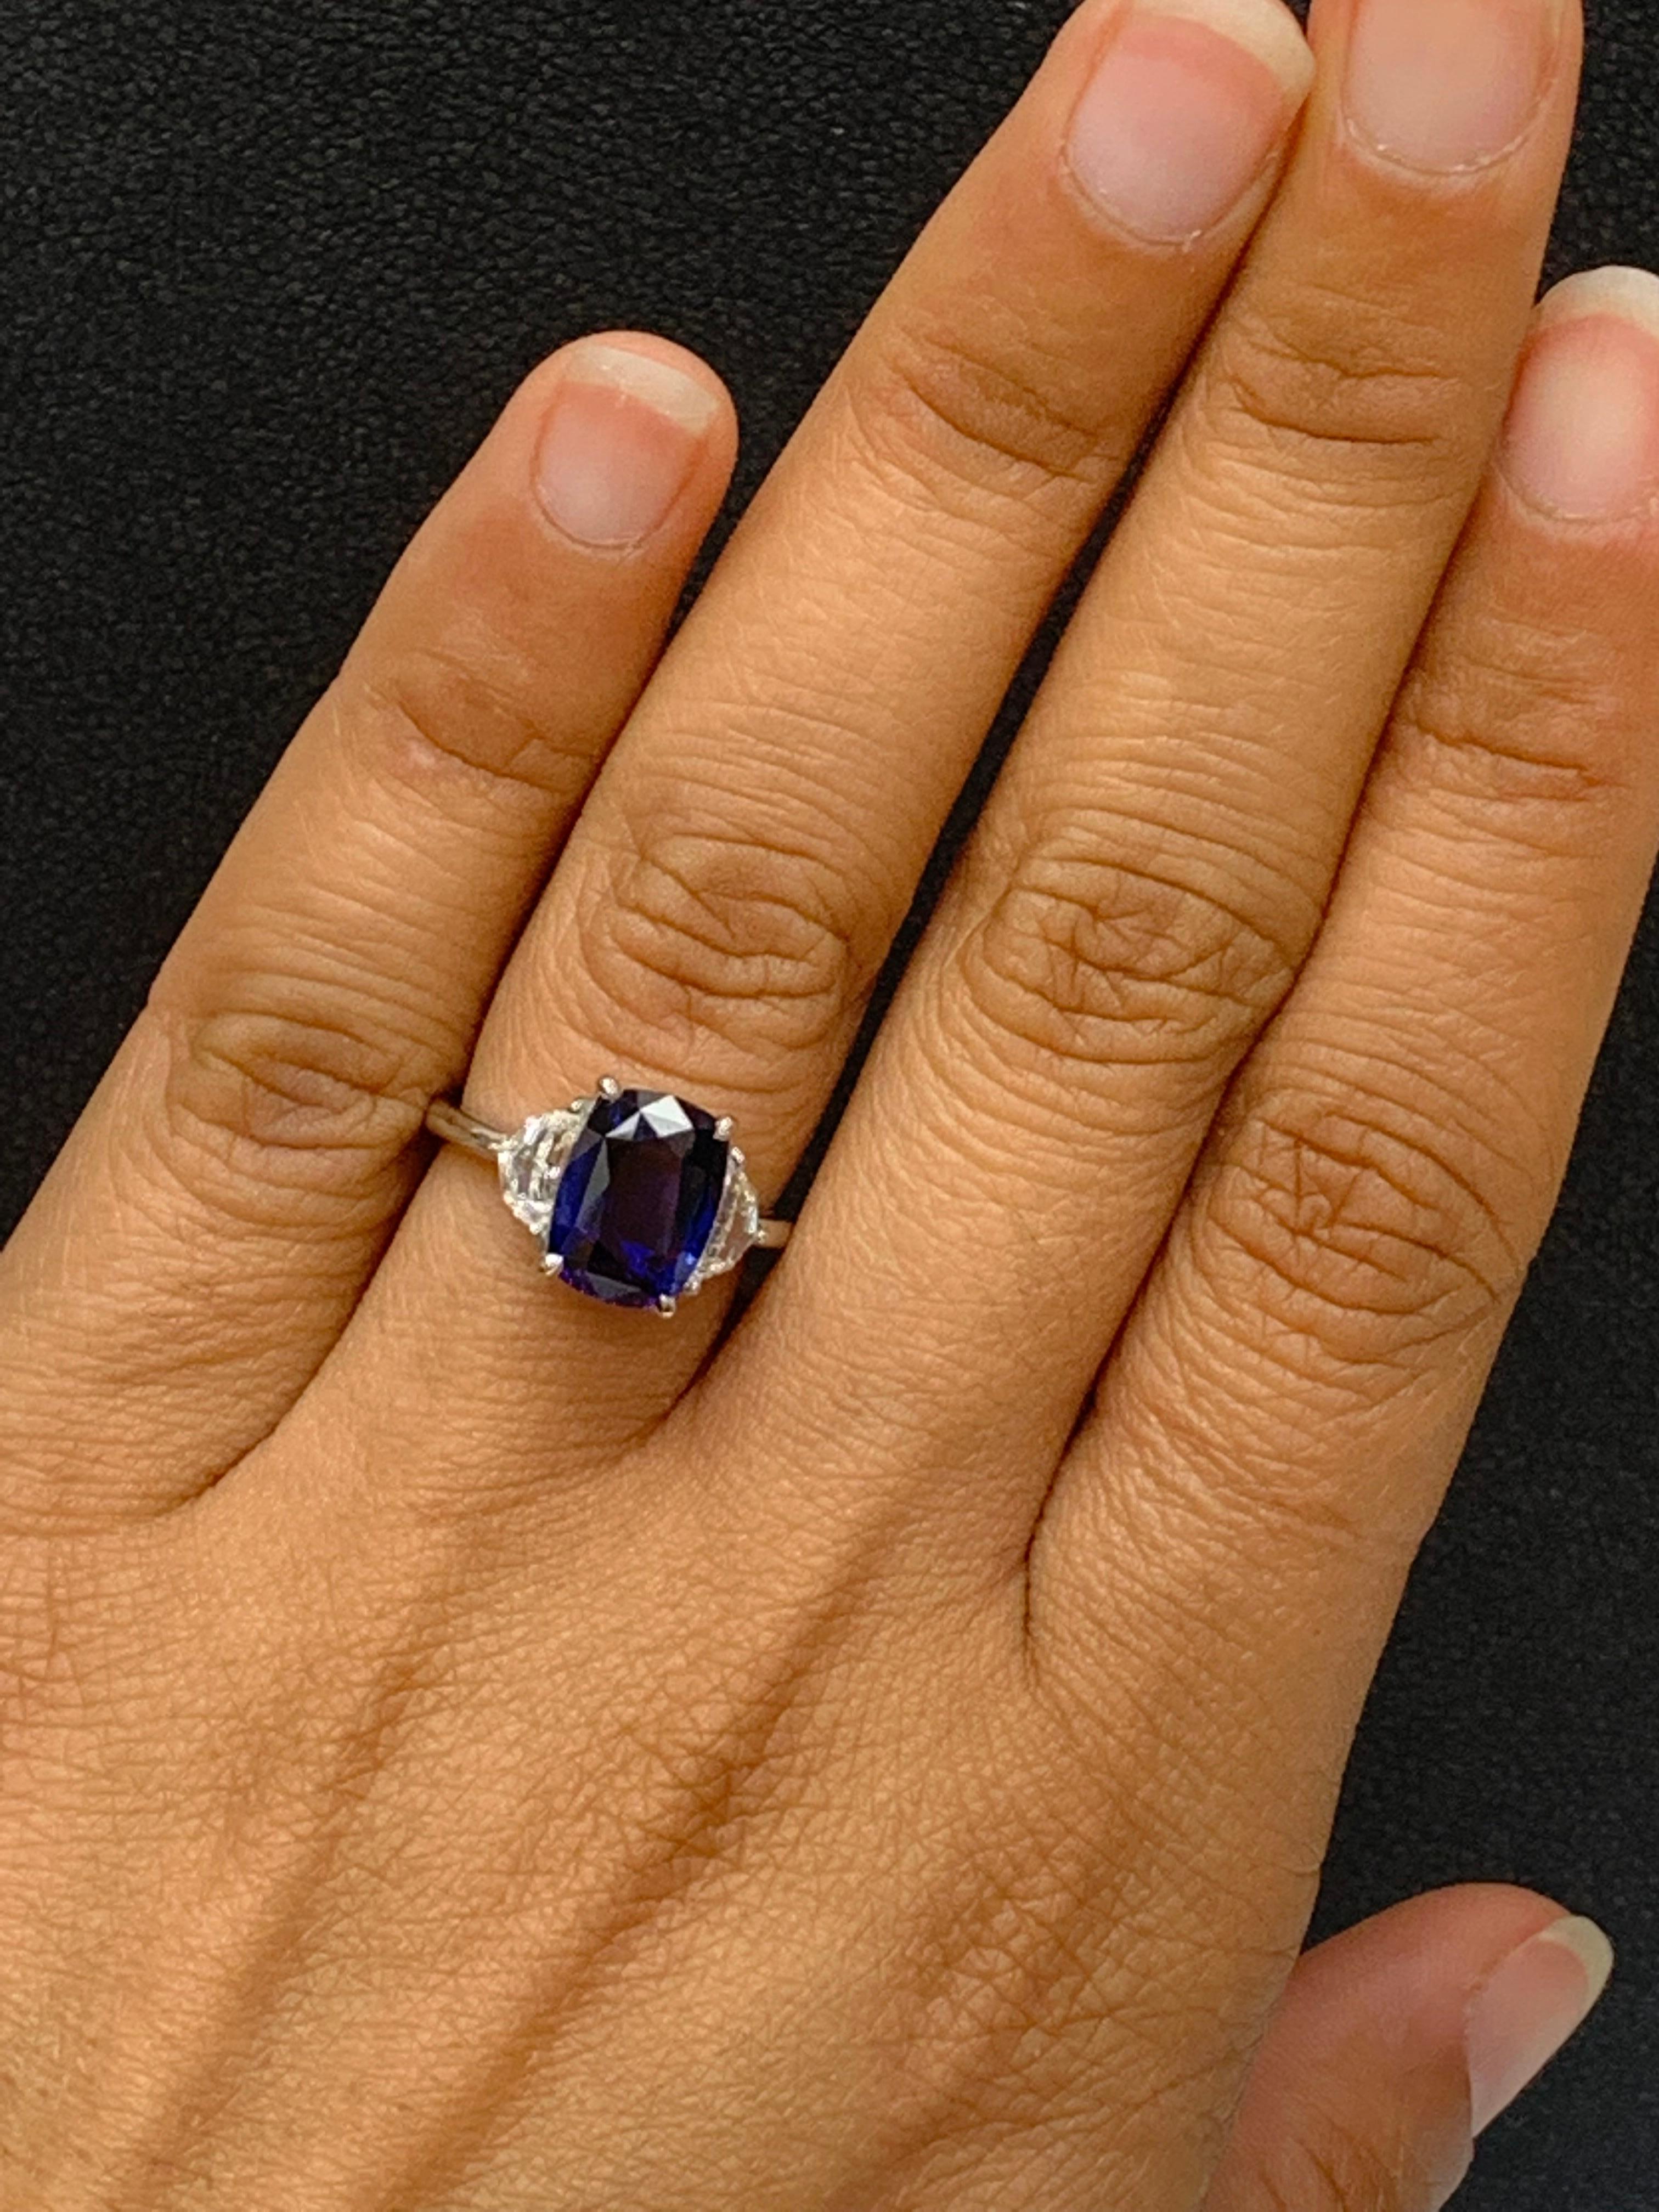 Certified 3.54 Carat Cushion Cut Blue Sapphire Diamond 3-Stone Ring in Platinum For Sale 12